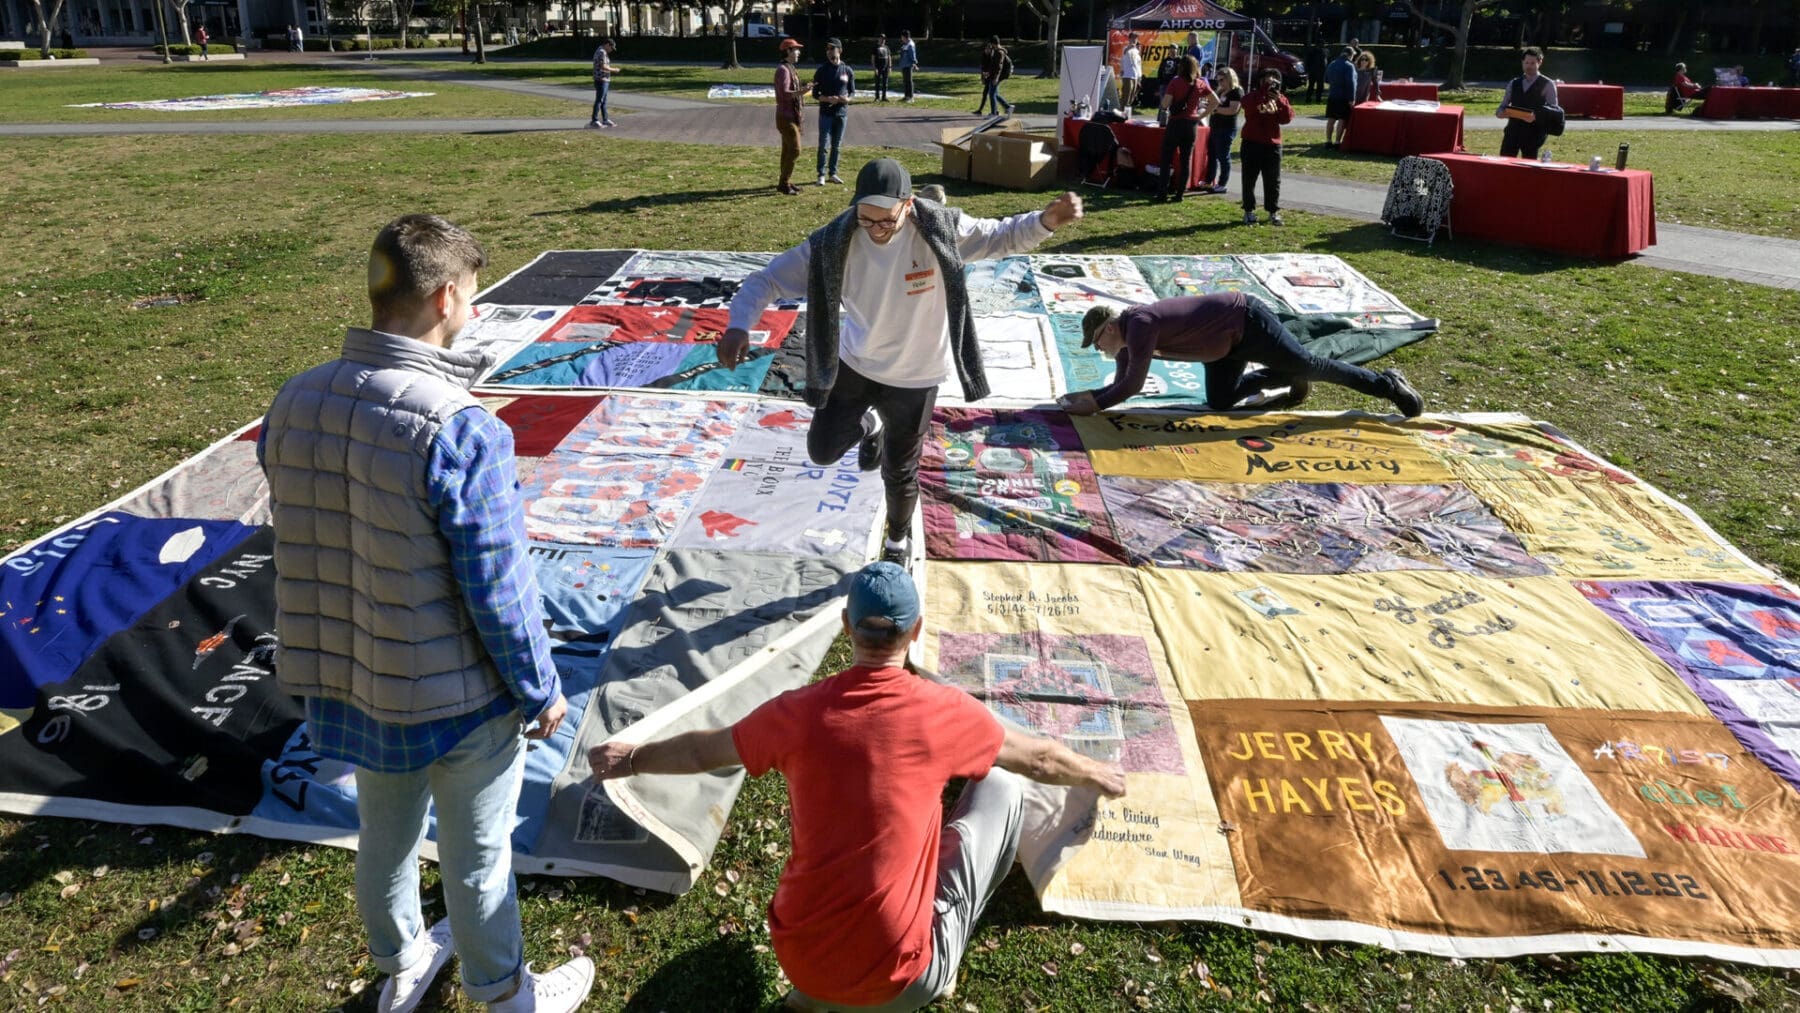 Workers and volunteers assemble sections of the AIDS Quilt out on McCarthy quad during AIDS quilt memorial and life celebration for World AIDS Day